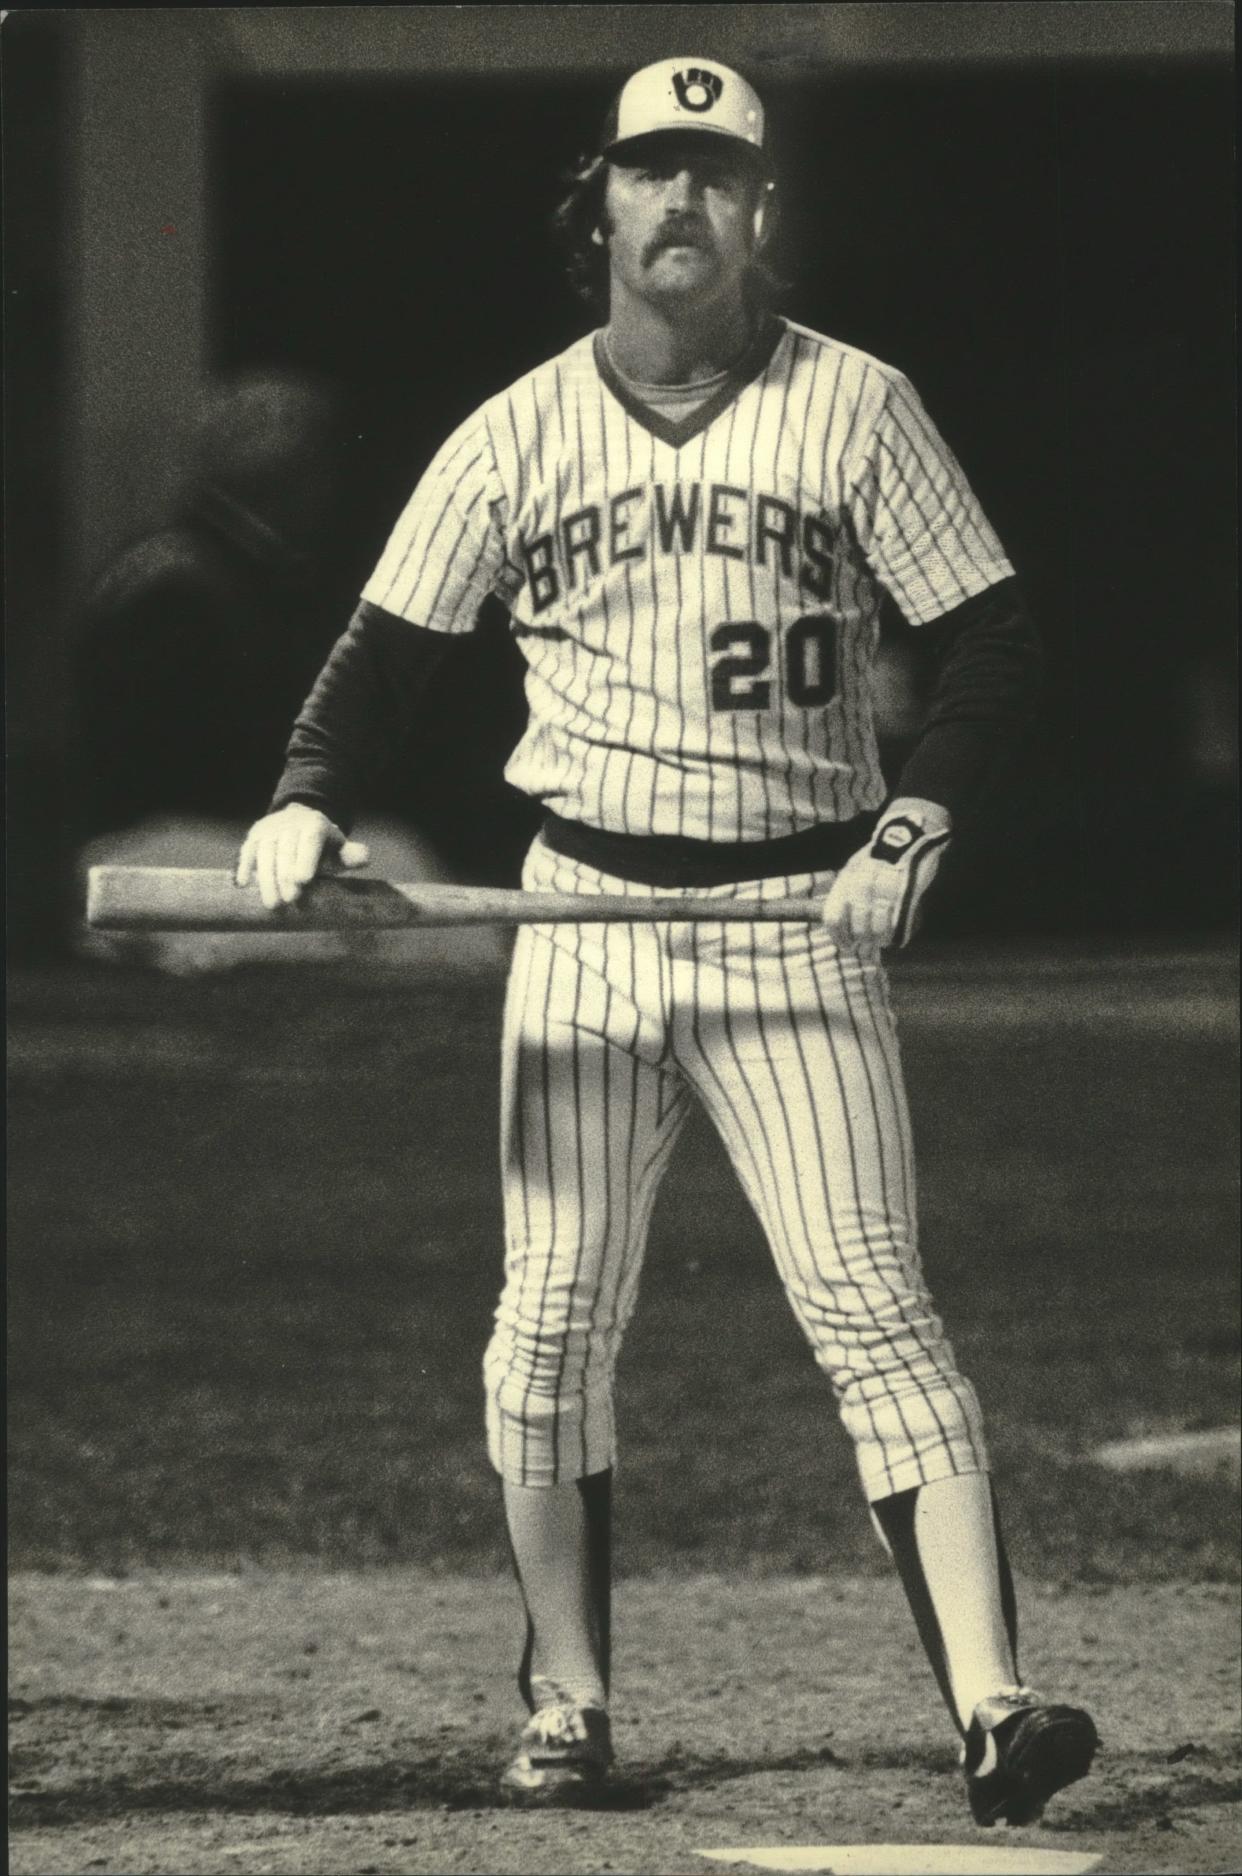 Gorman Thomas is one of the top sluggers in Brewers history.